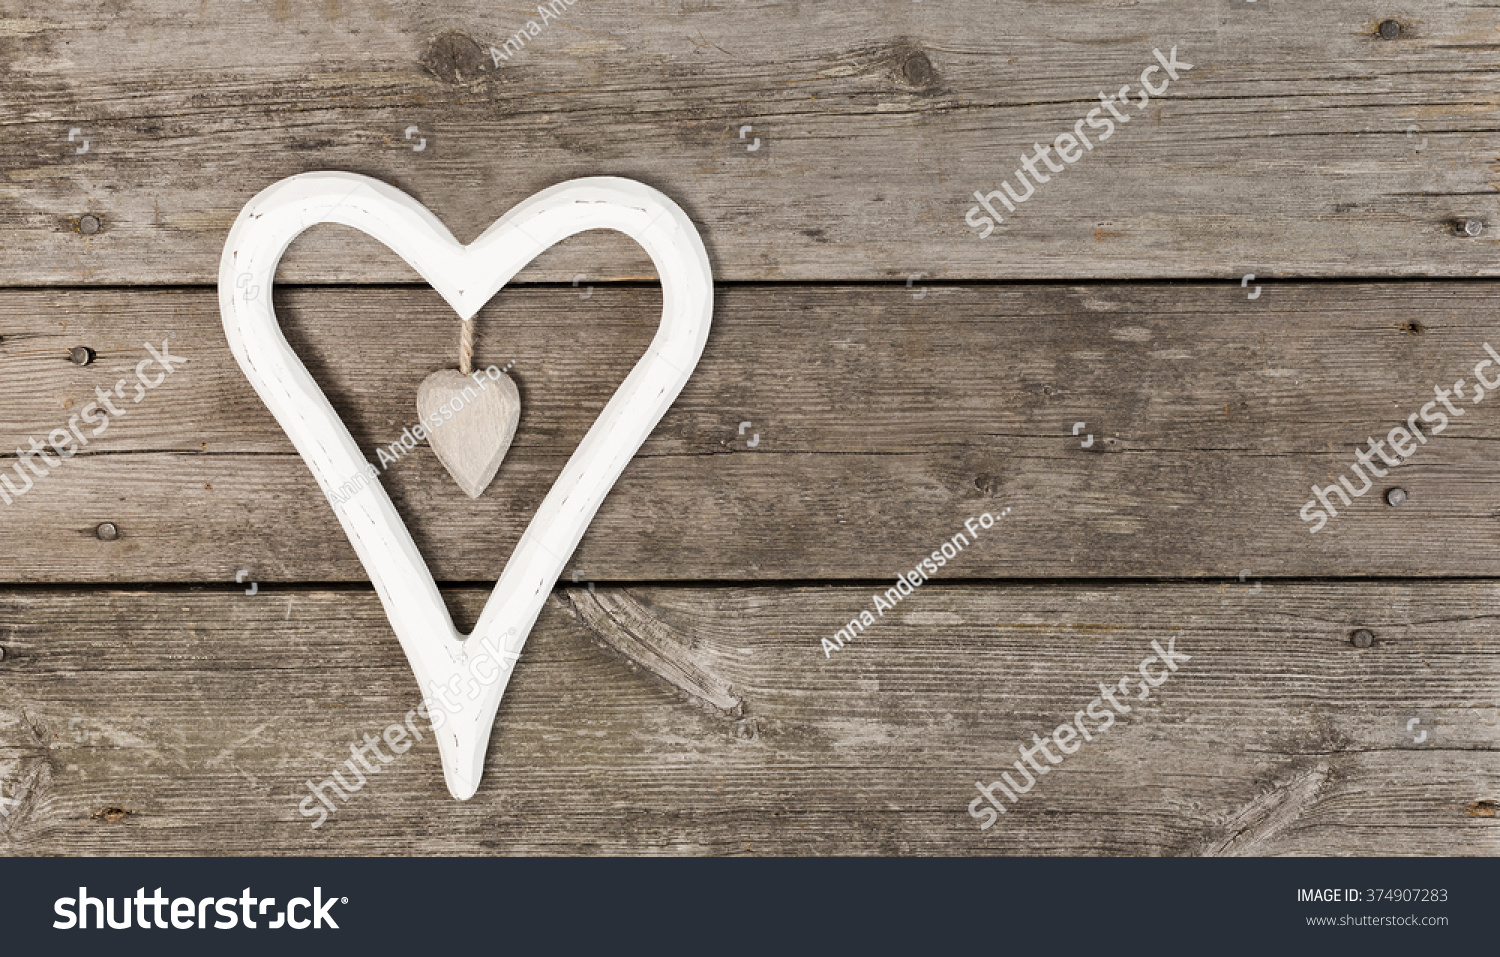 Decoration heartshaped on wooden background with copy space #374907283